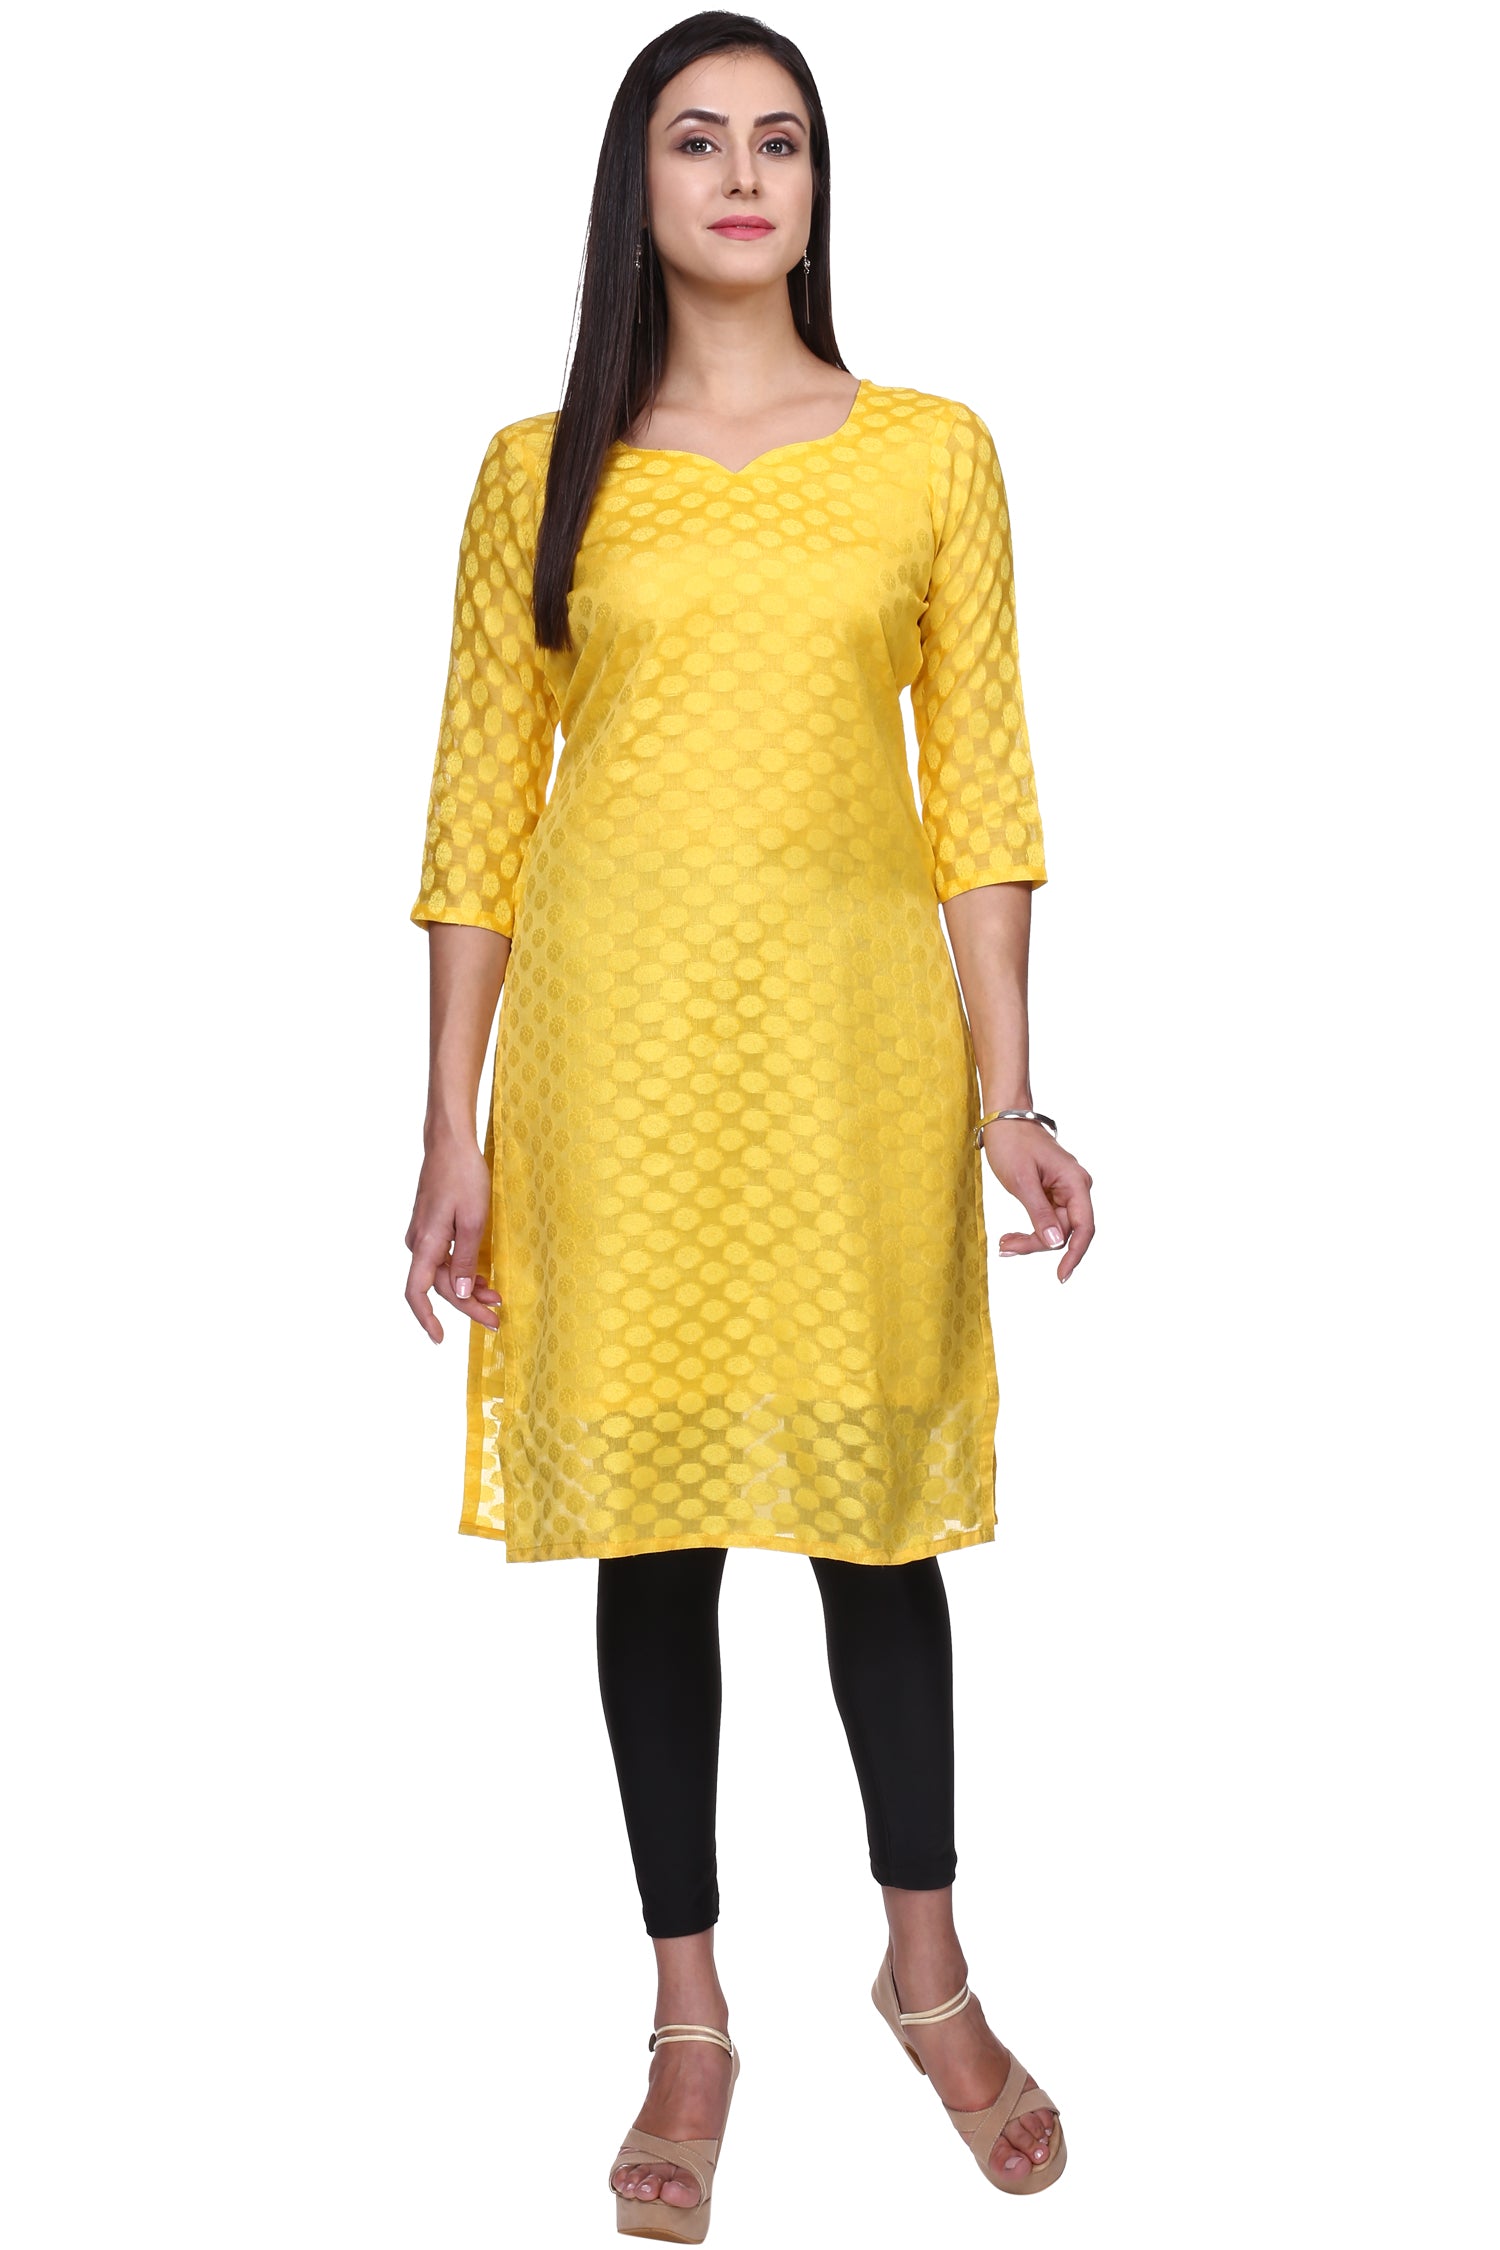 Buy HIRSHITA Combo of Rayon A-Line Kurti with Cotton Lycra Leggings at  Amazon.in